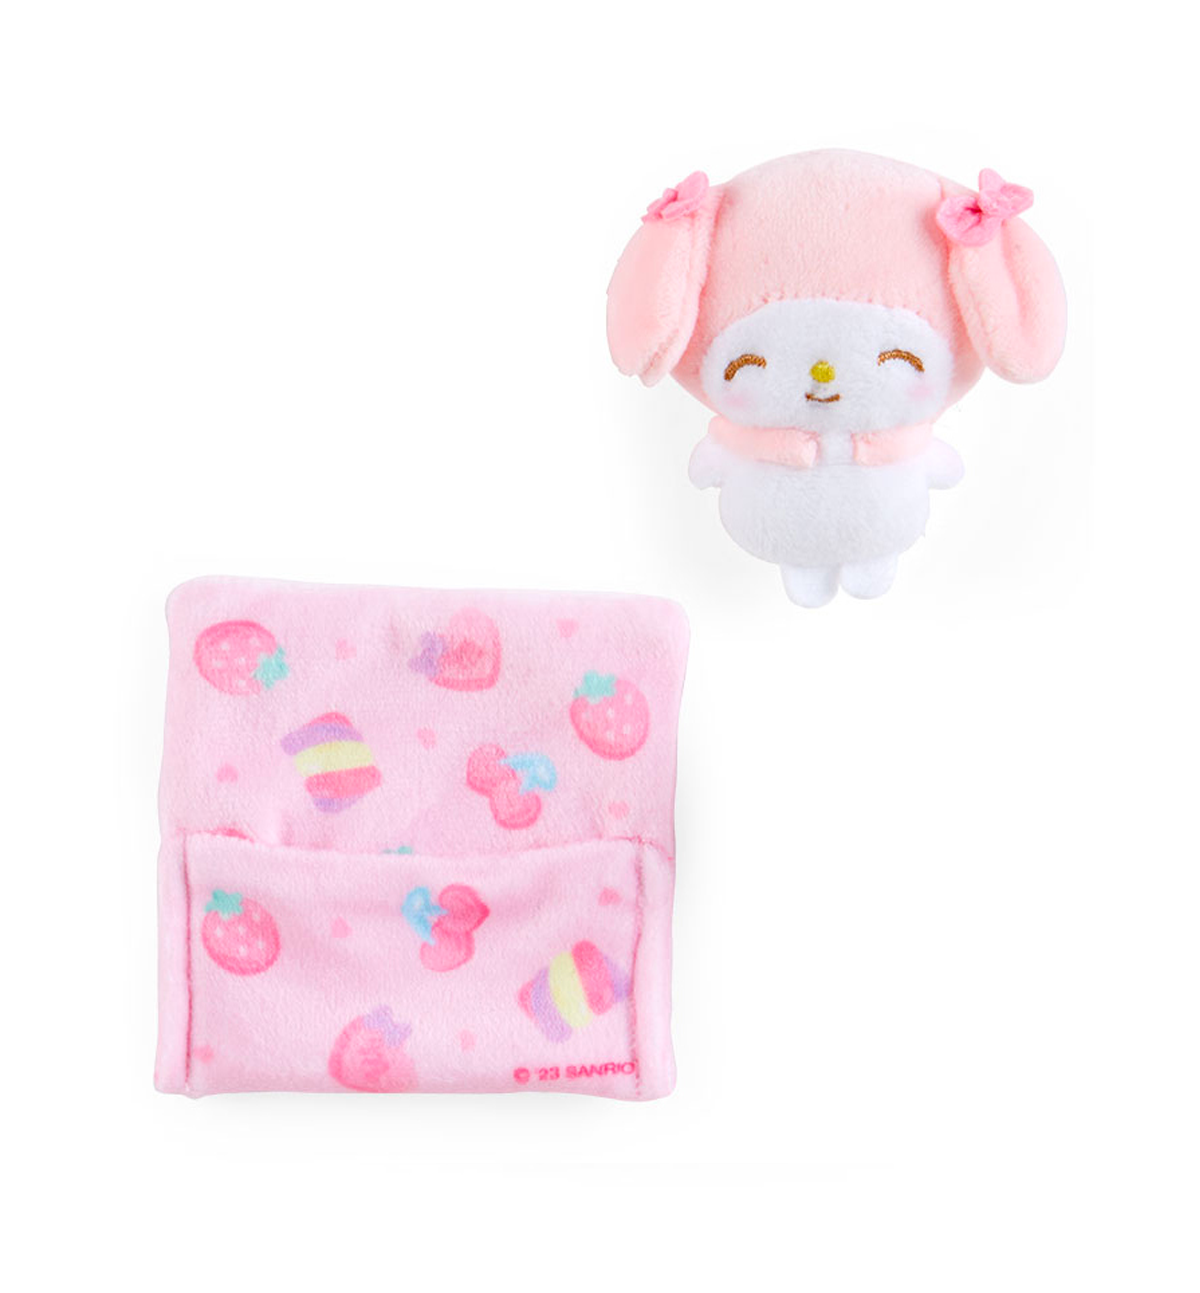 Sanrio Convenience Store Collection Series Mascot Holder [My Melody]